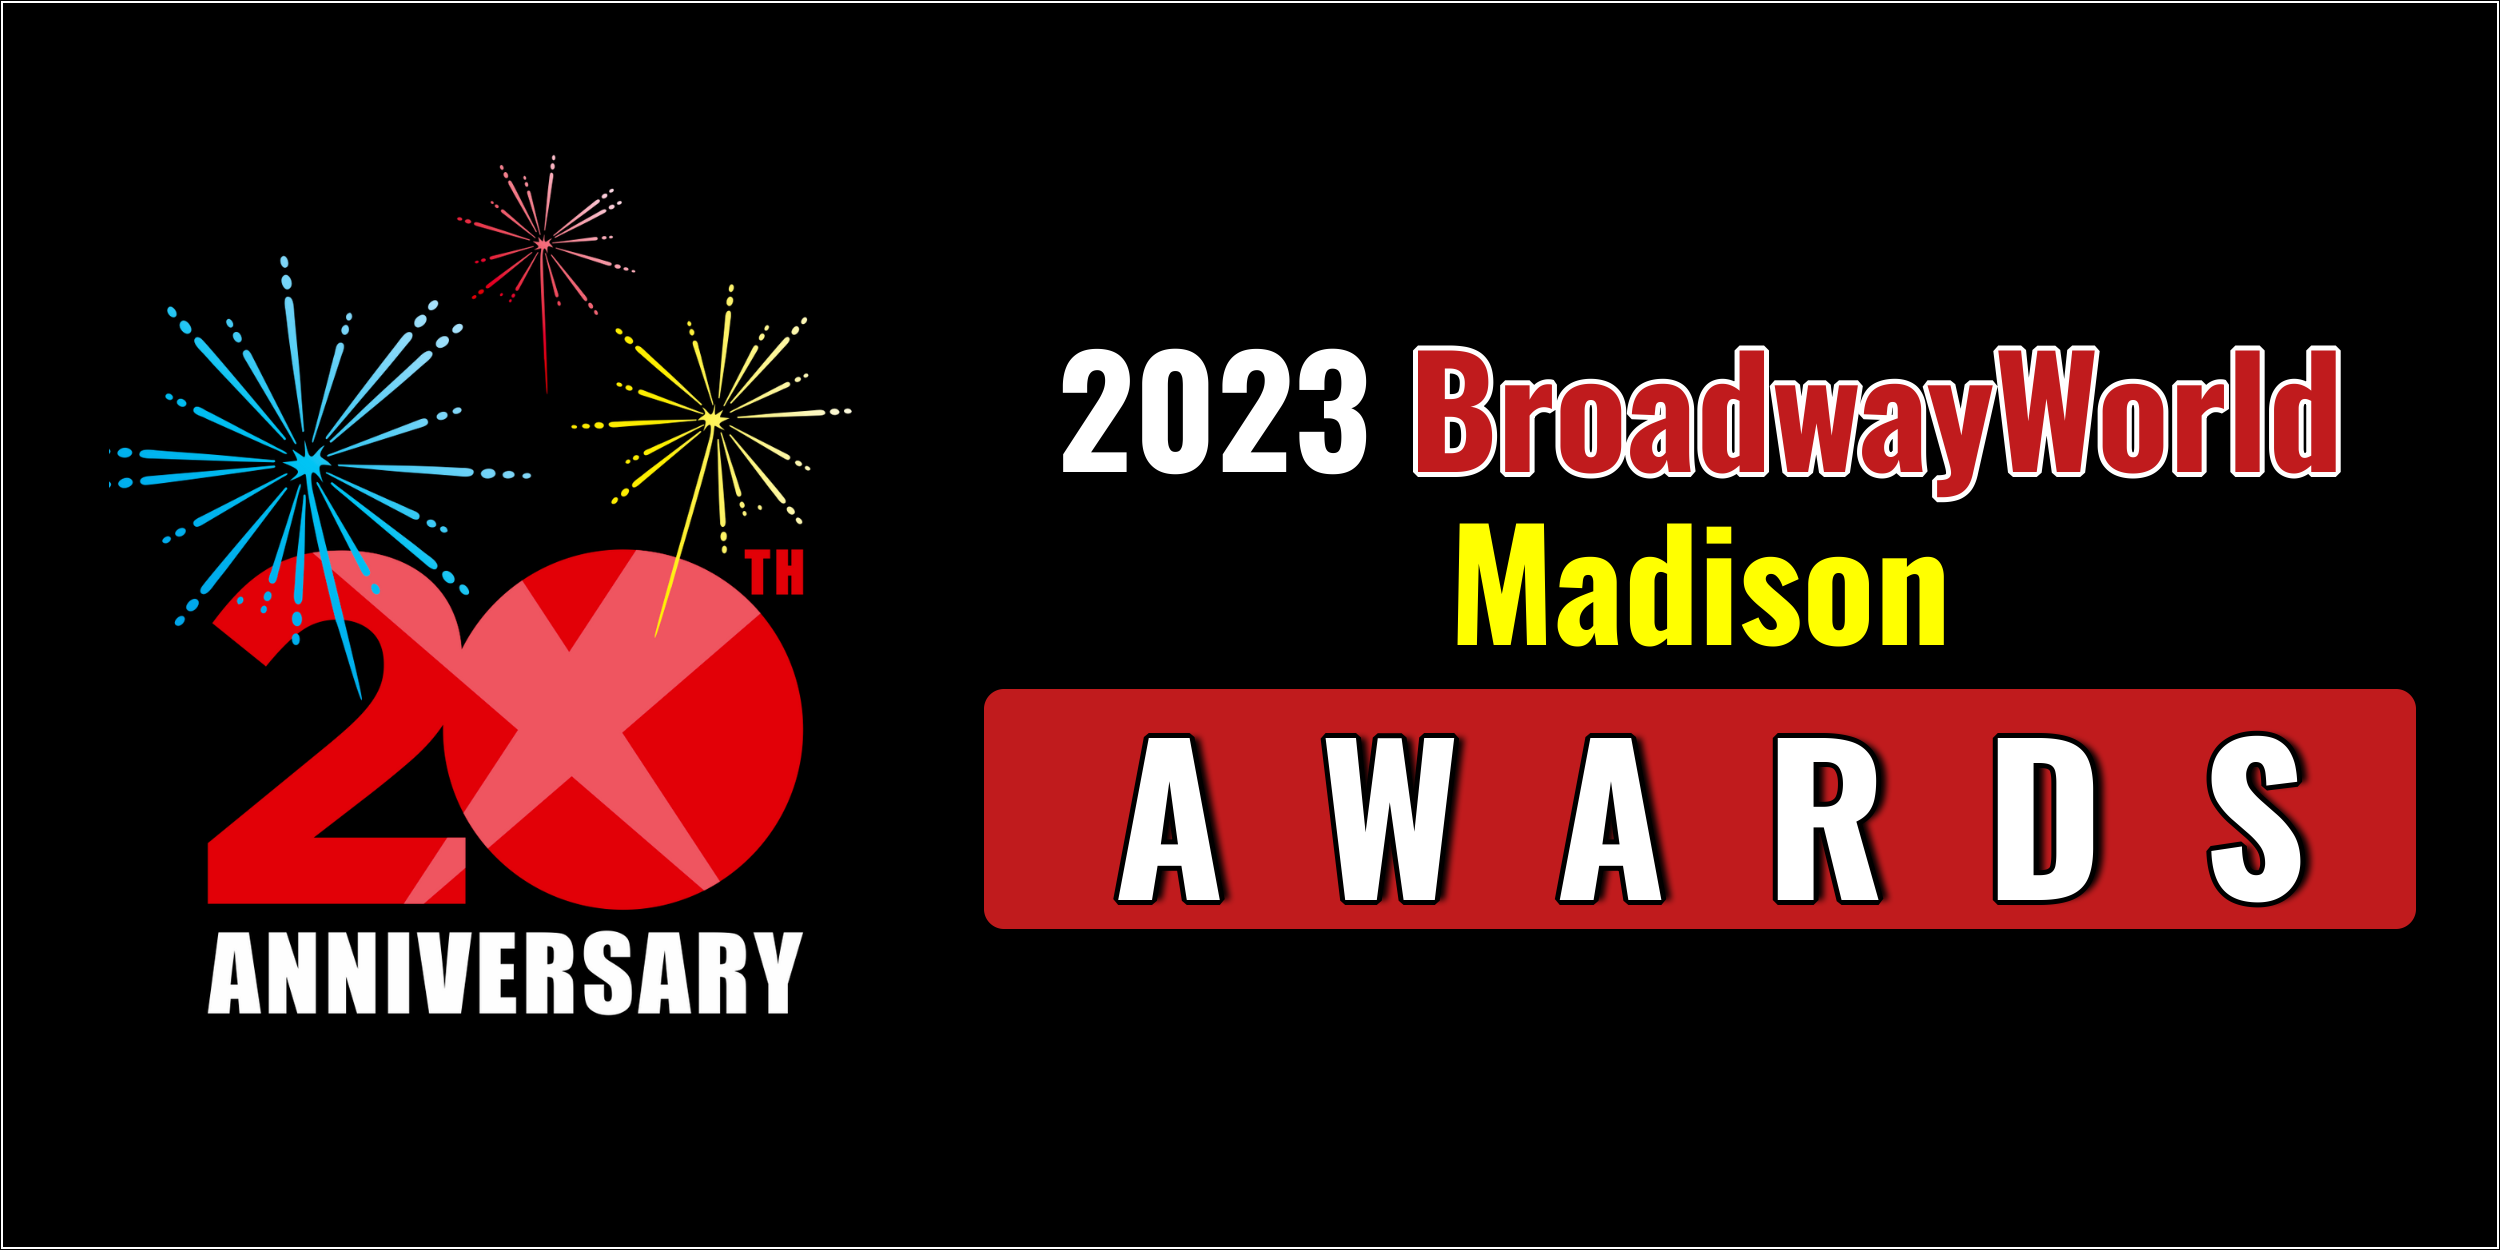 Latest Standings Announced For The 2023 BroadwayWorld Madison Awards; THE 39 STEPS Leads B Photo